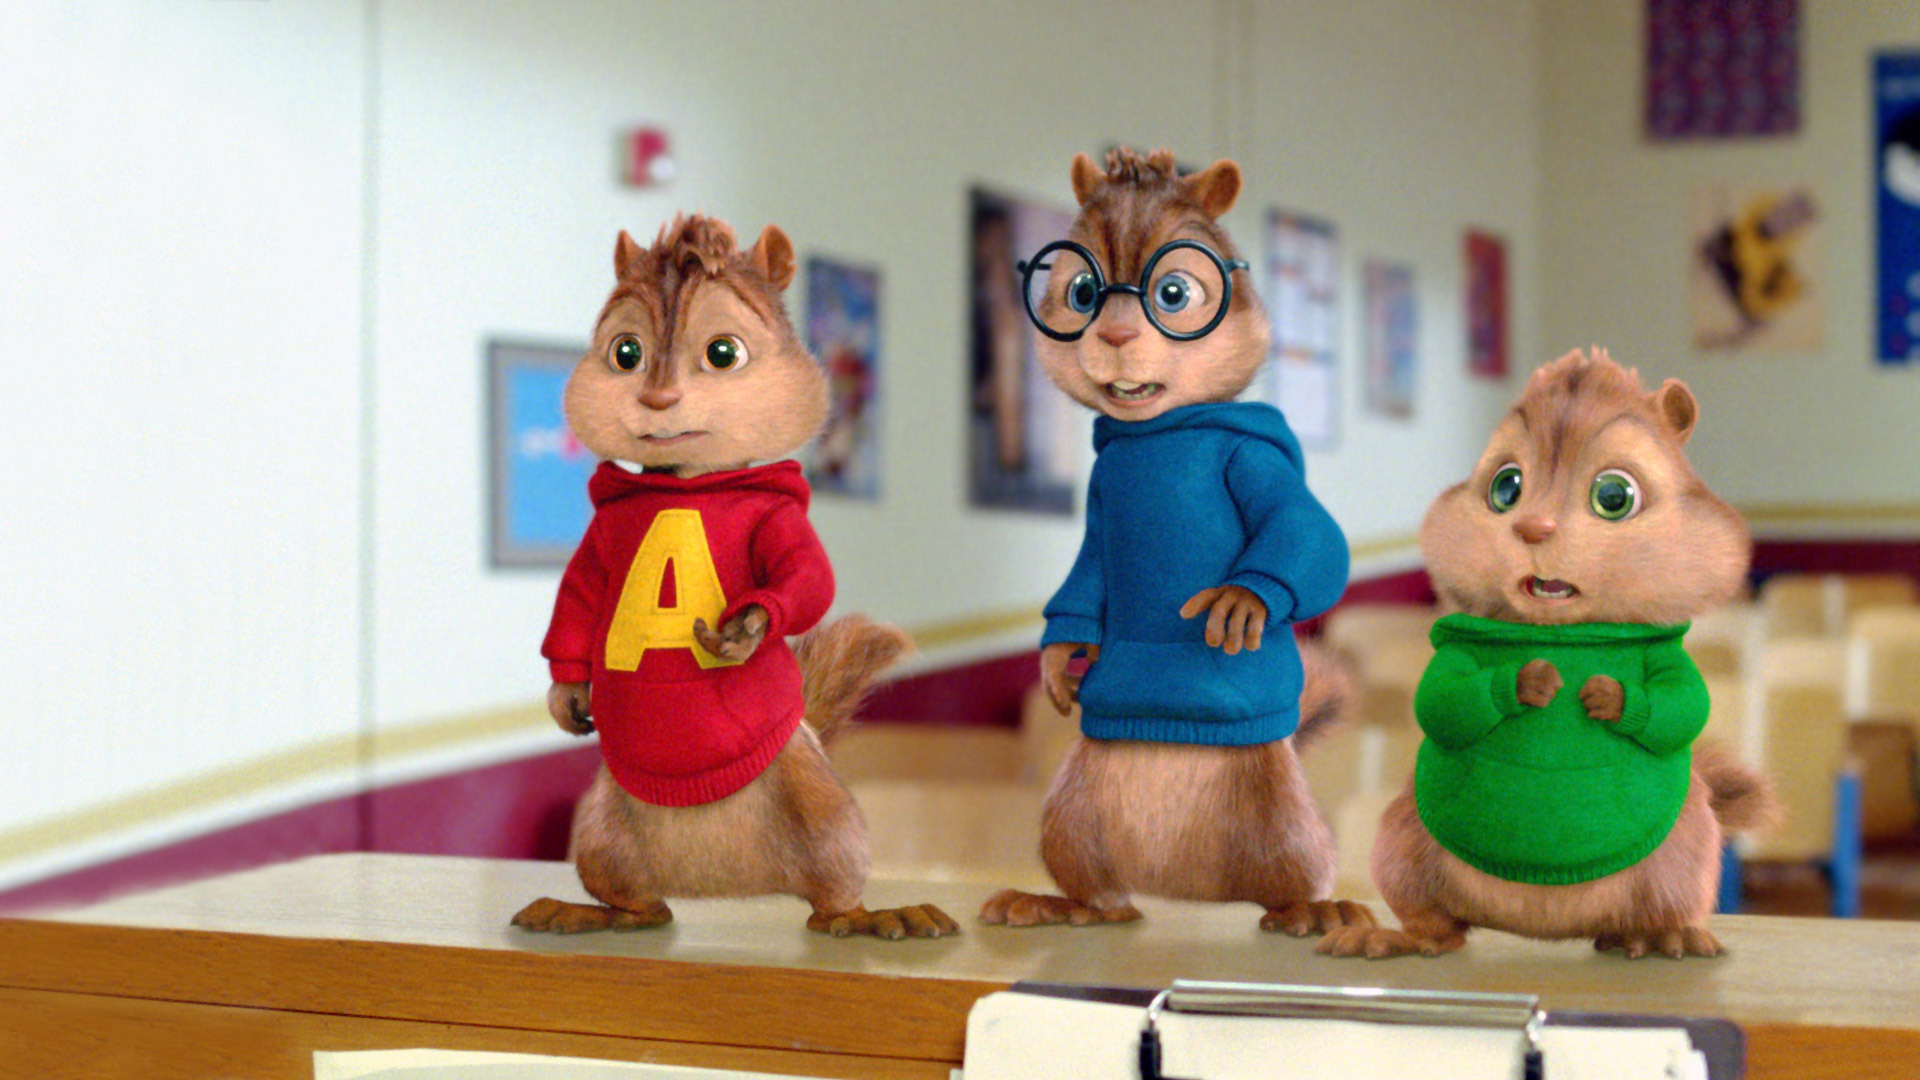 Alvin And The Chipmunks: The Squeakquel #5